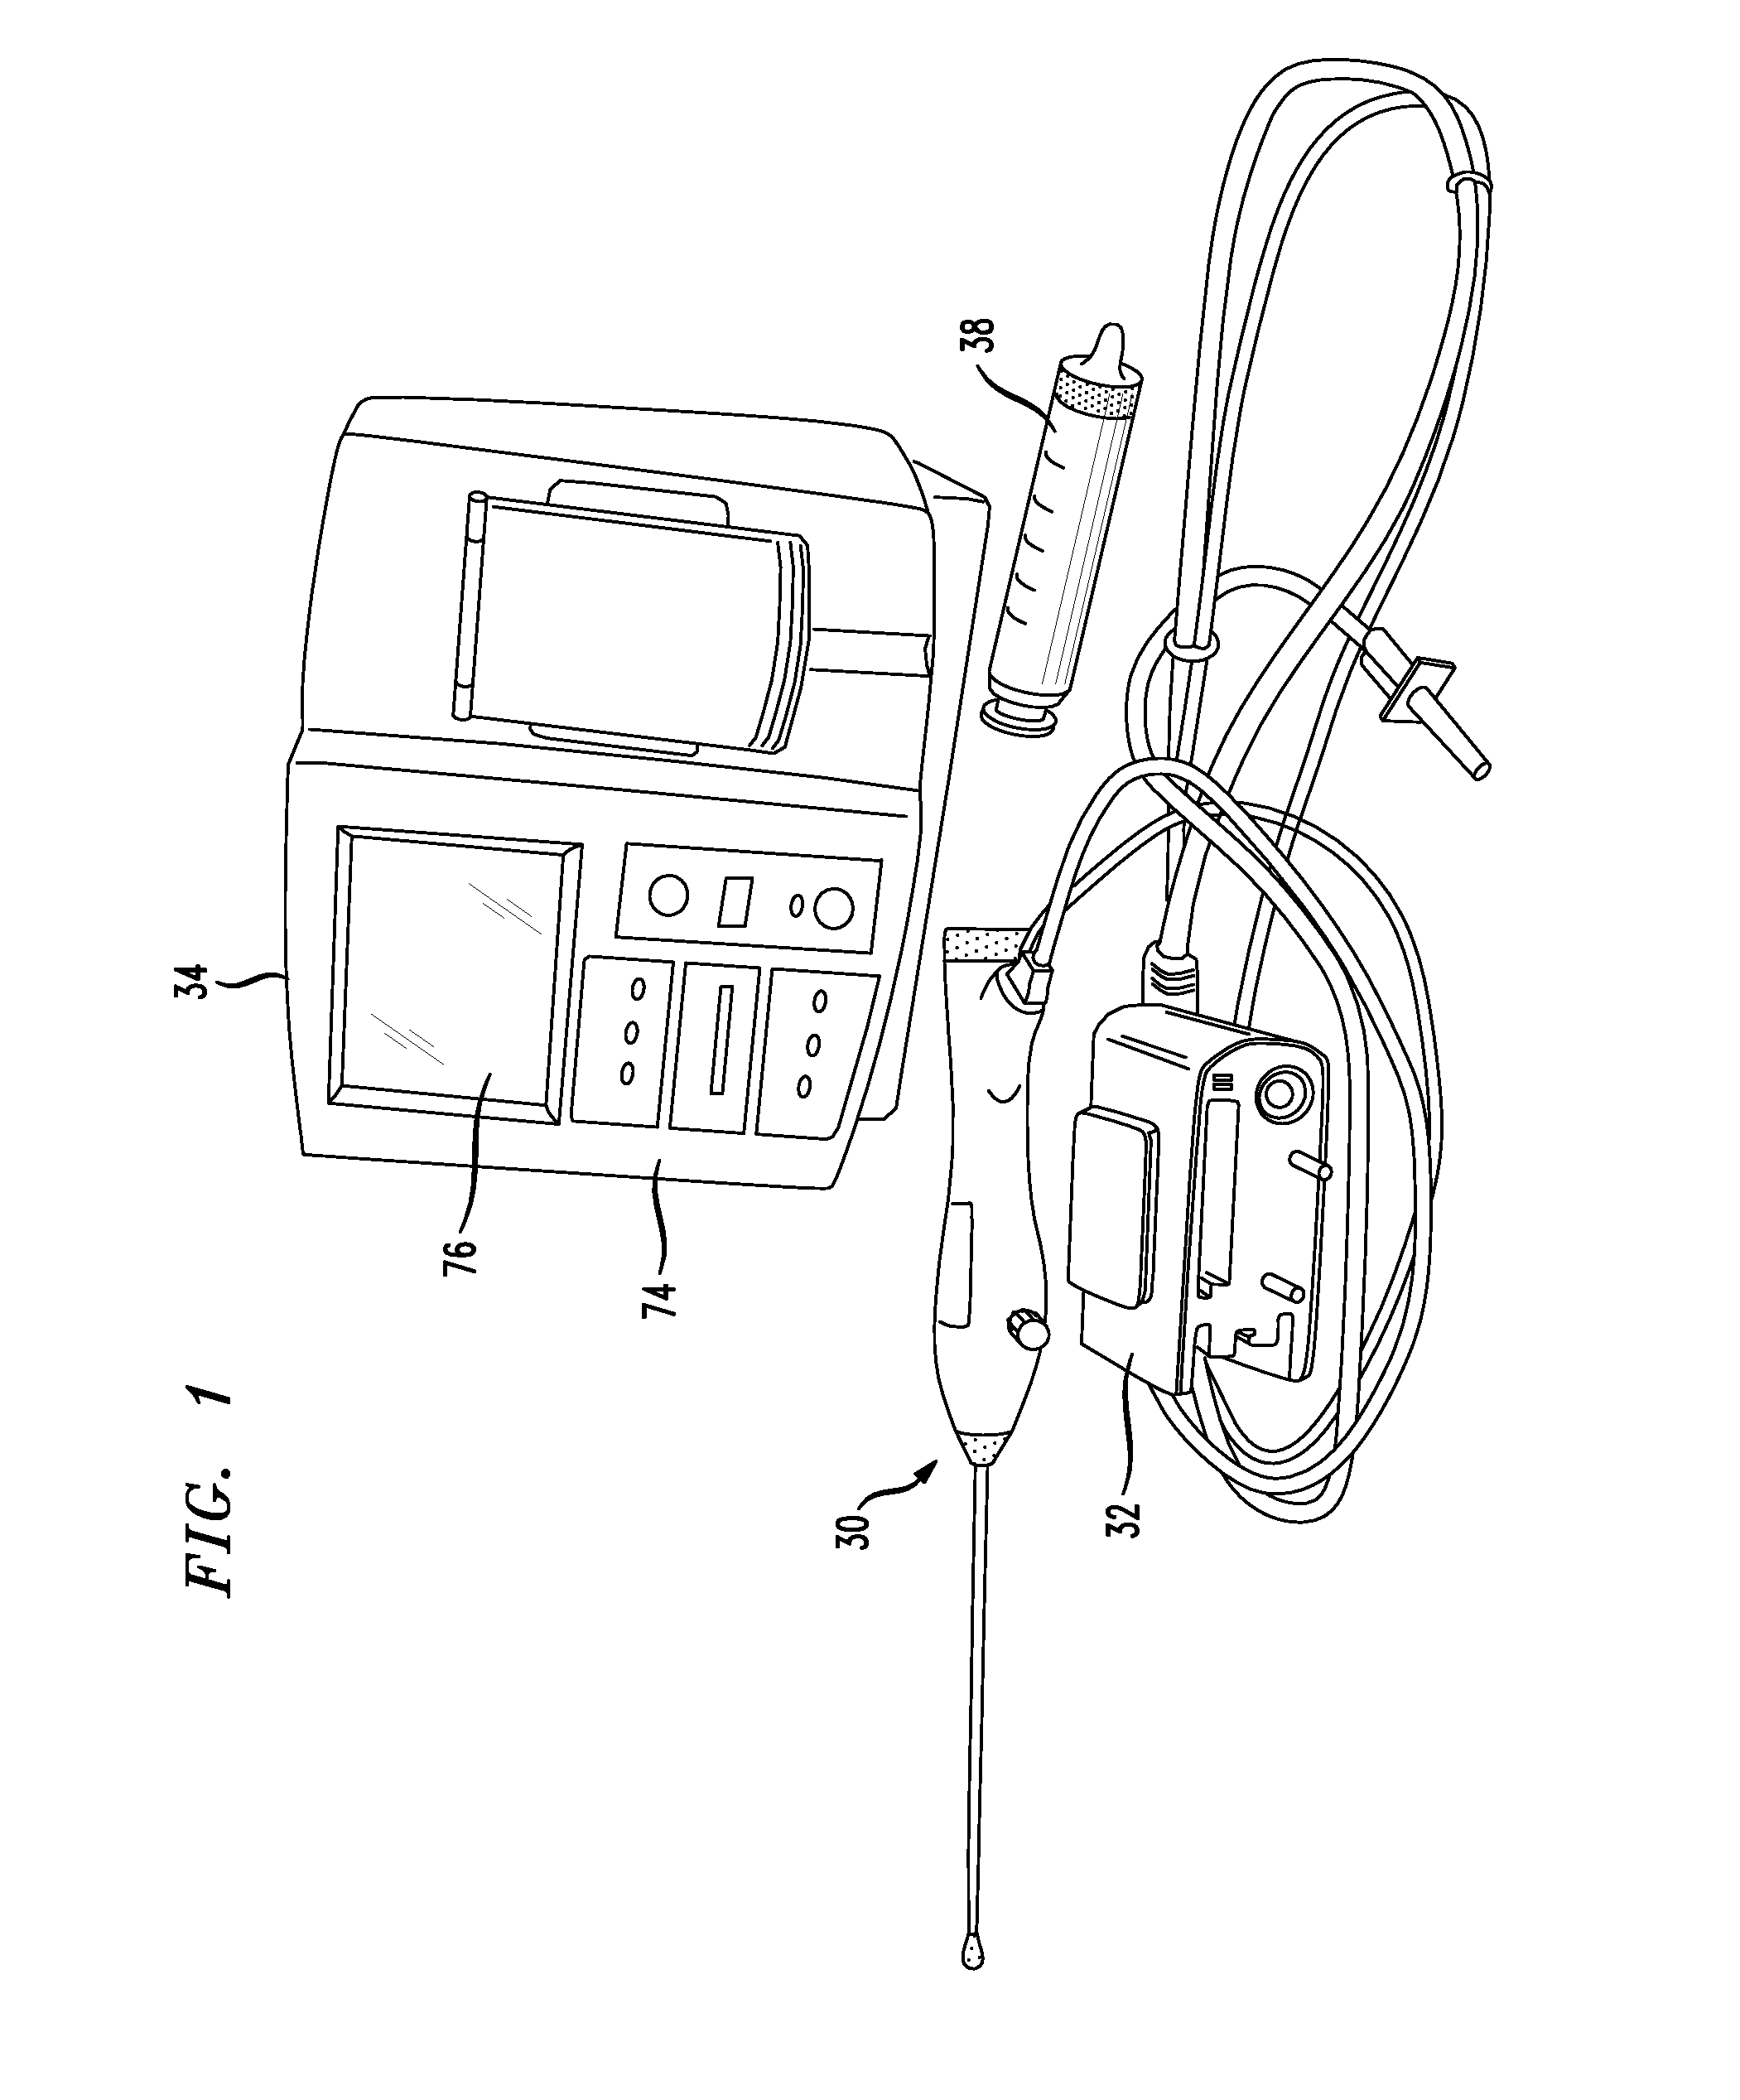 Balloon catheter systems and methods for treating uterine disorders